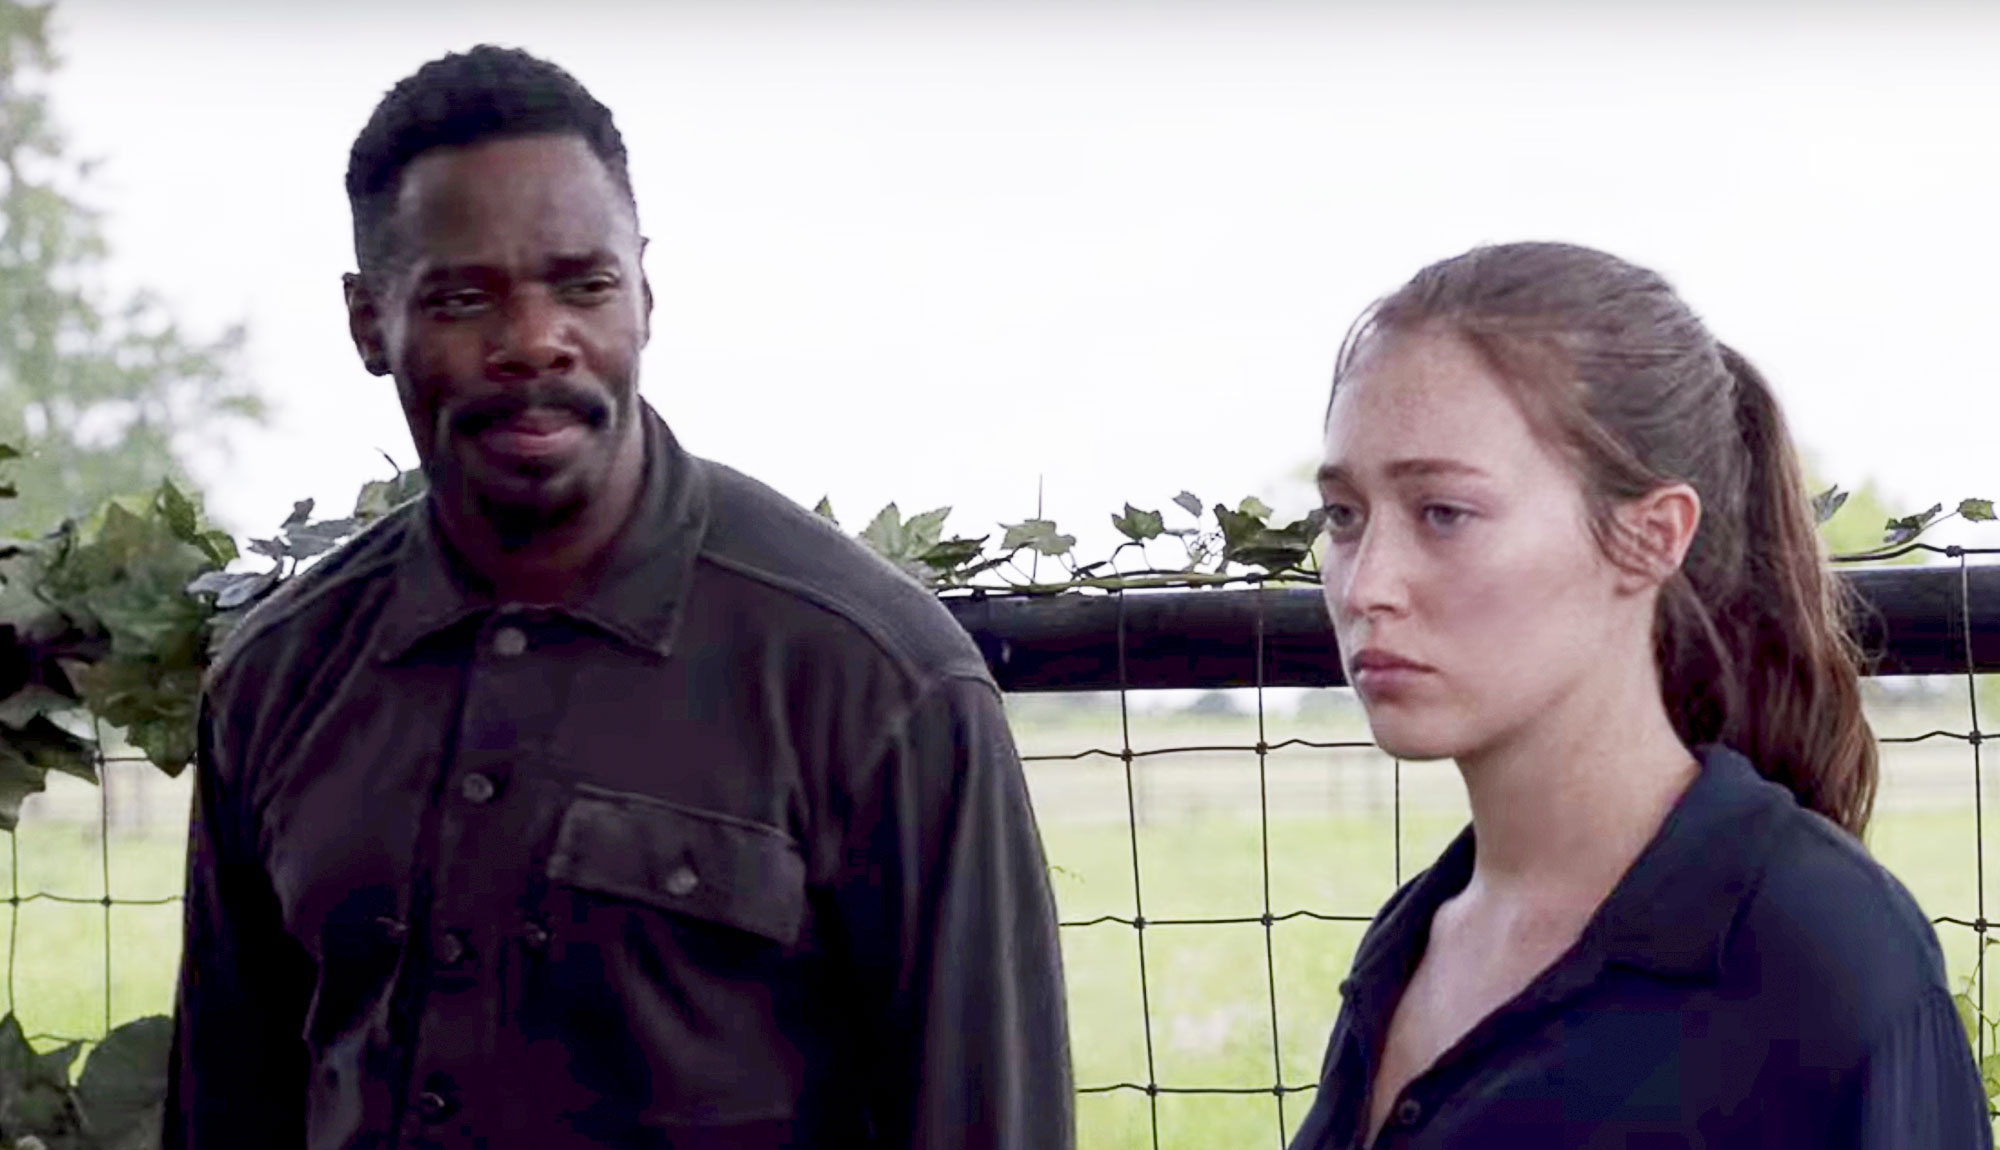 The Opening Minutes of Fear the Walking Dead Episode 511